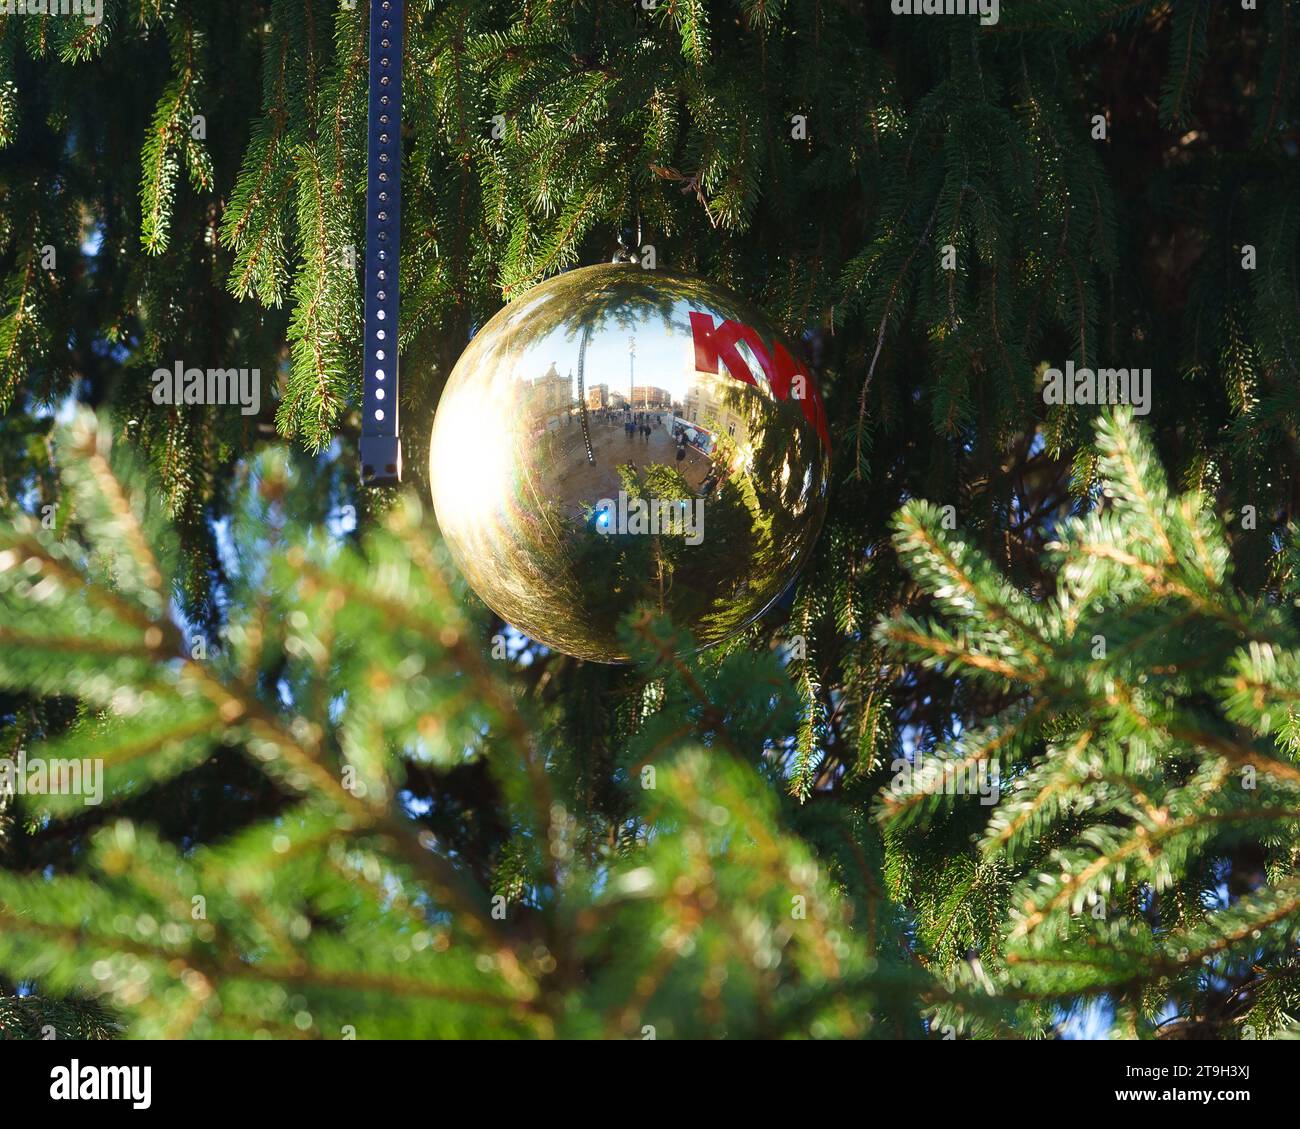 Christmas bauble on a christmas tree, reflecting the town square below. Stock Photo